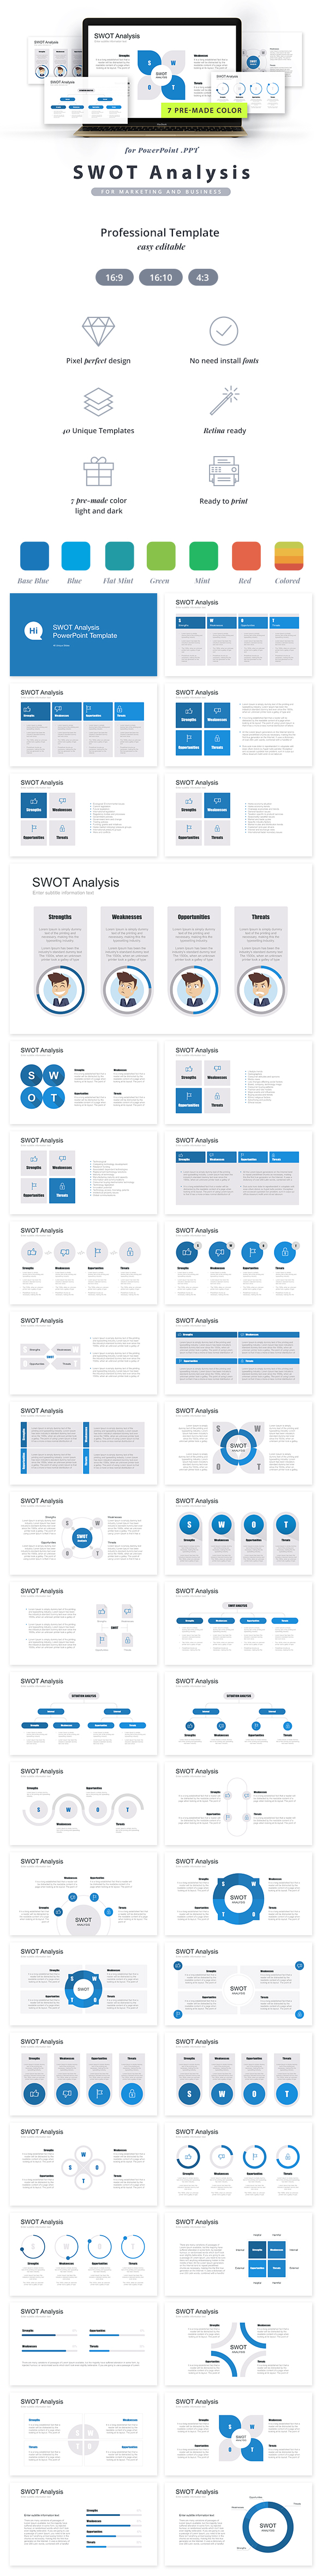 Swot Analysis PowerPoint Template